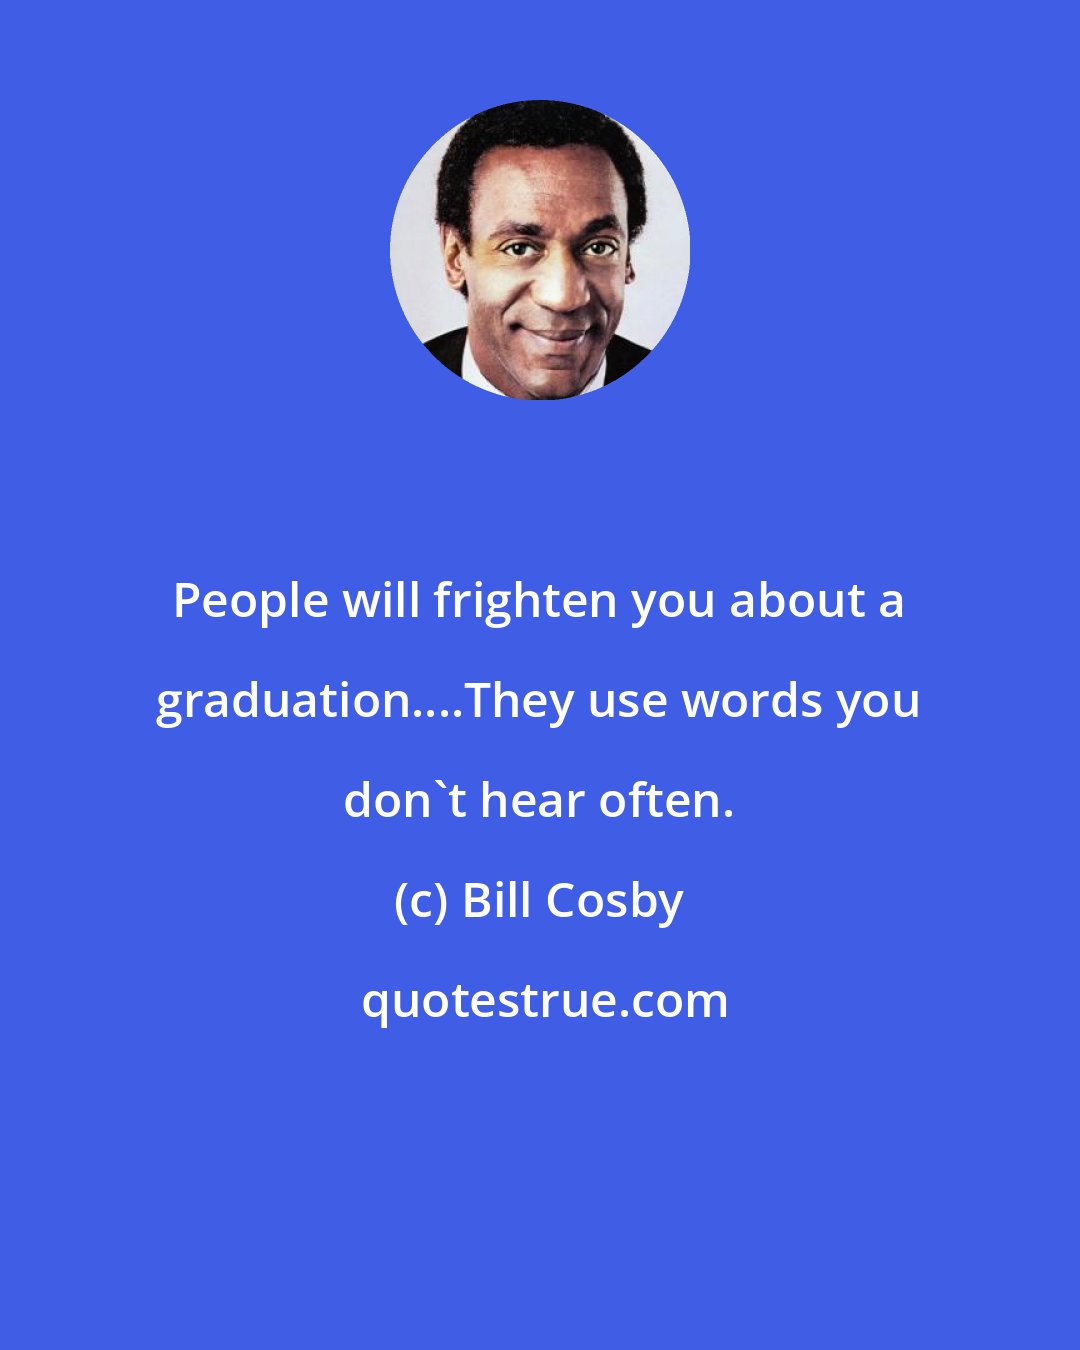 Bill Cosby: People will frighten you about a graduation....They use words you don't hear often.